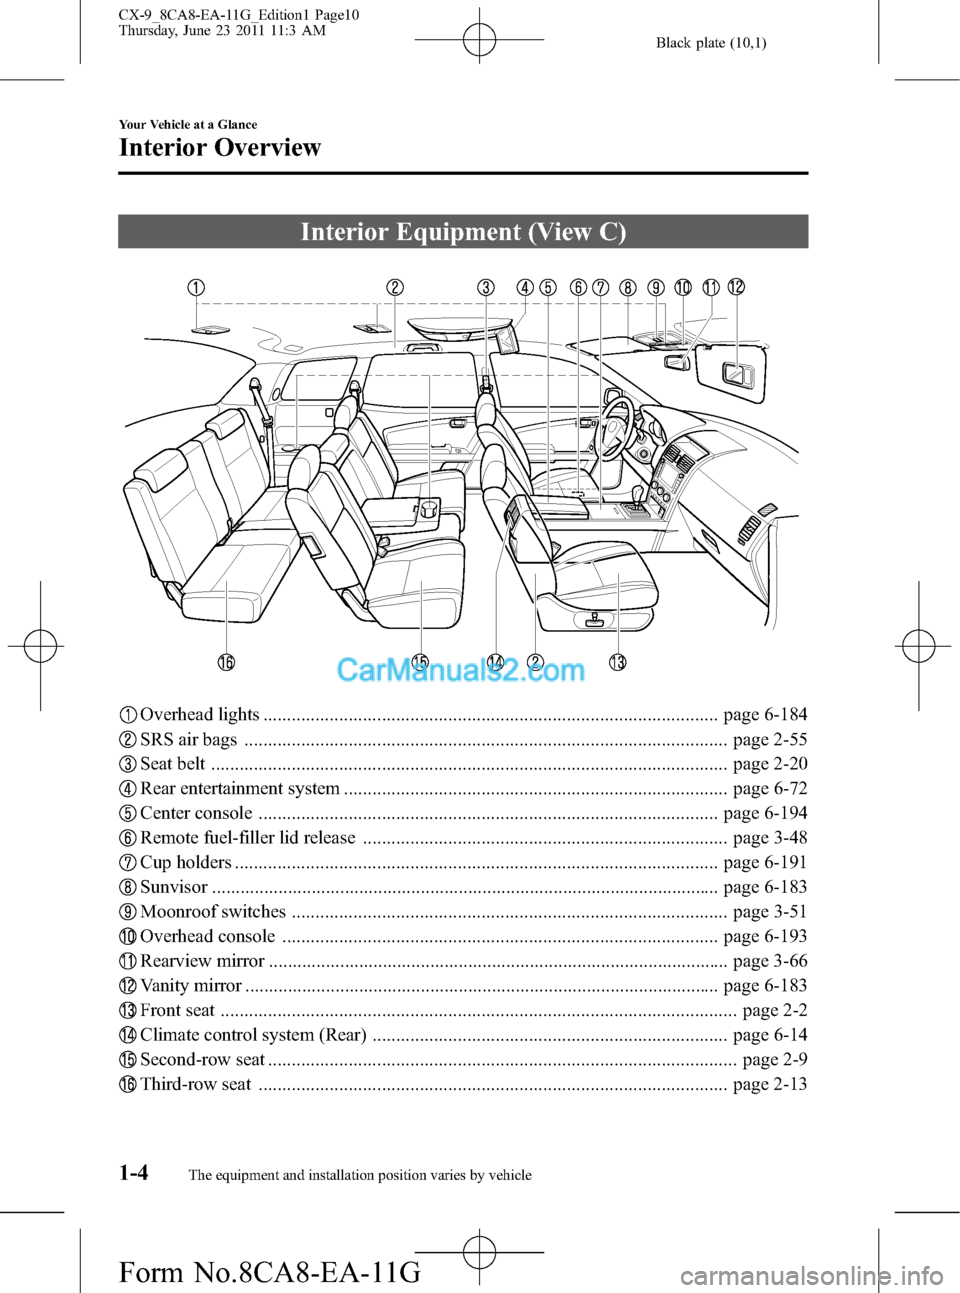 MAZDA MODEL CX-9 2012  Owners Manual (in English) Black plate (10,1)
Interior Equipment (View C)
Overhead lights ................................................................................................ page 6-184
SRS air bags ................